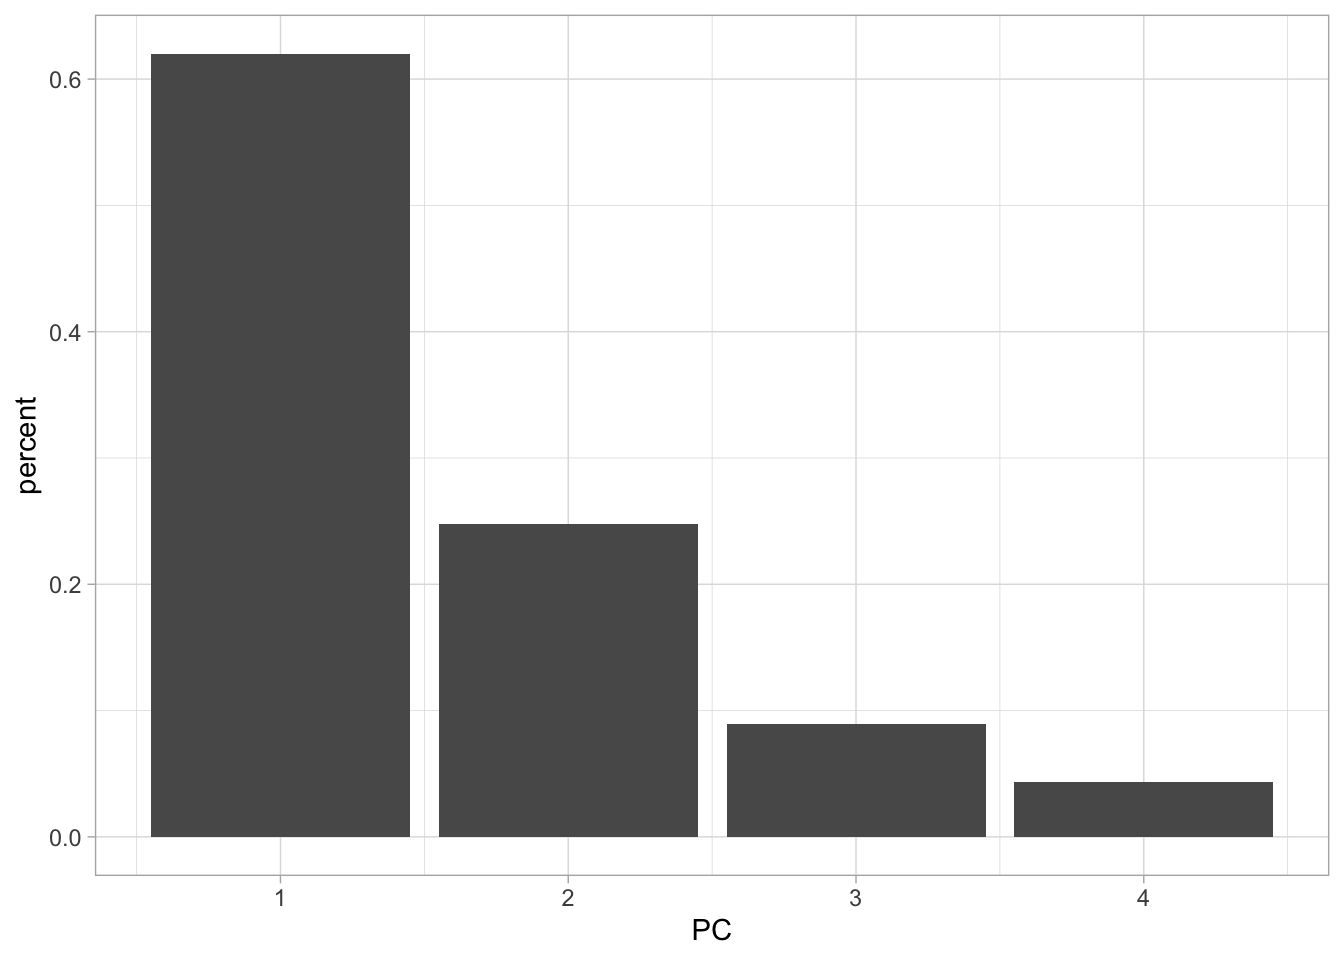 Bar chart of percent standard deviation explained for the 4 principal components. First PC is a little over 60%, second is at around 25%, third is a little under 10% and forth is at around 5%.